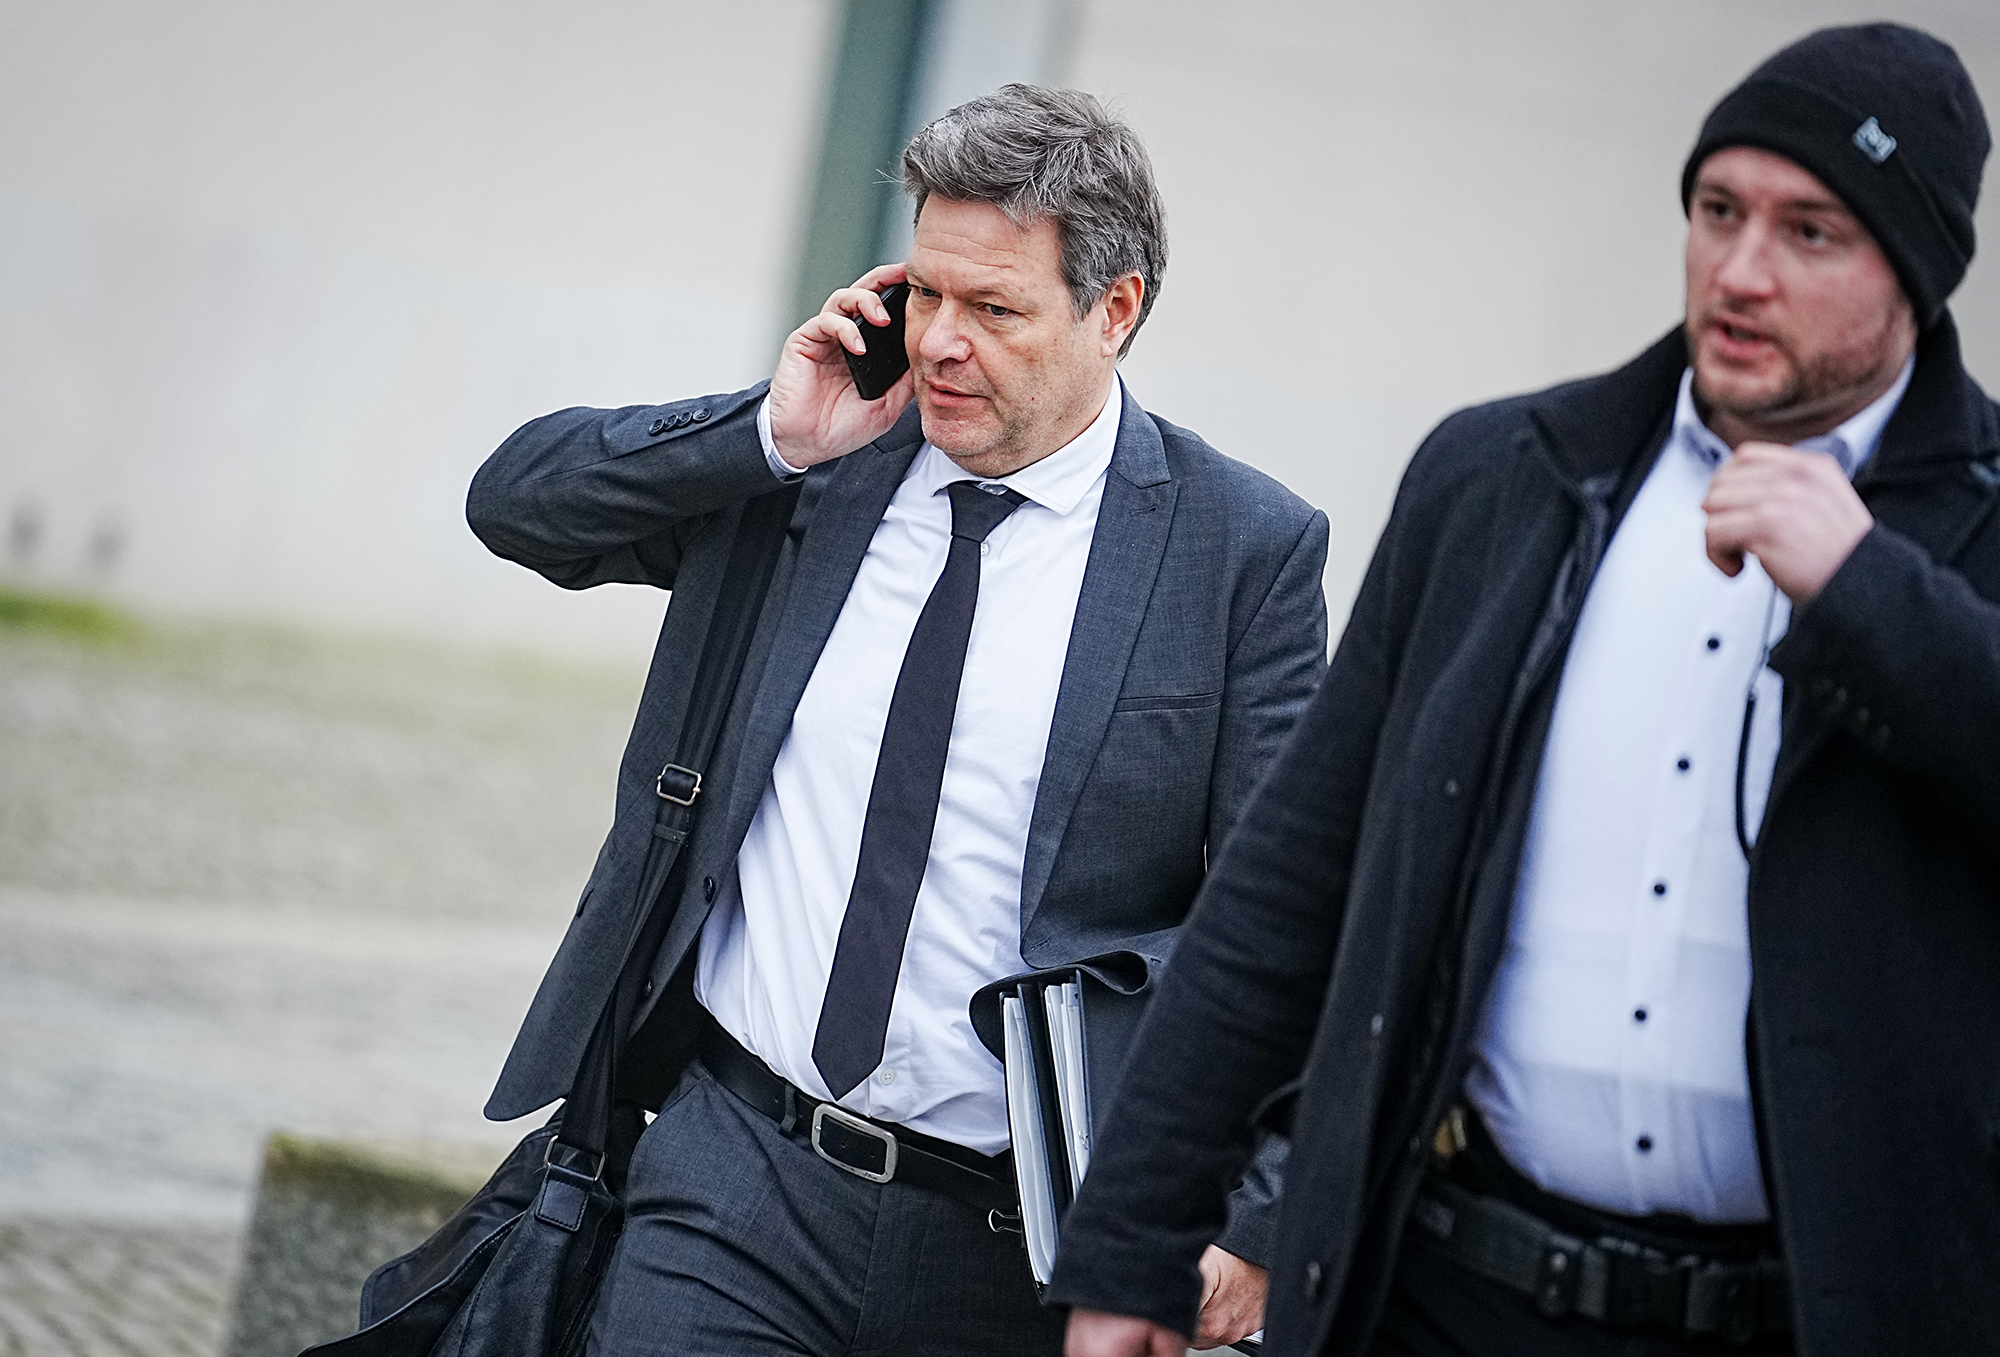 Robert Habeck, federal minister for the economy and climate protection, leaves the chancellor's office after a meeting of the federal cabinet in Berlin, Germany, on January 25.